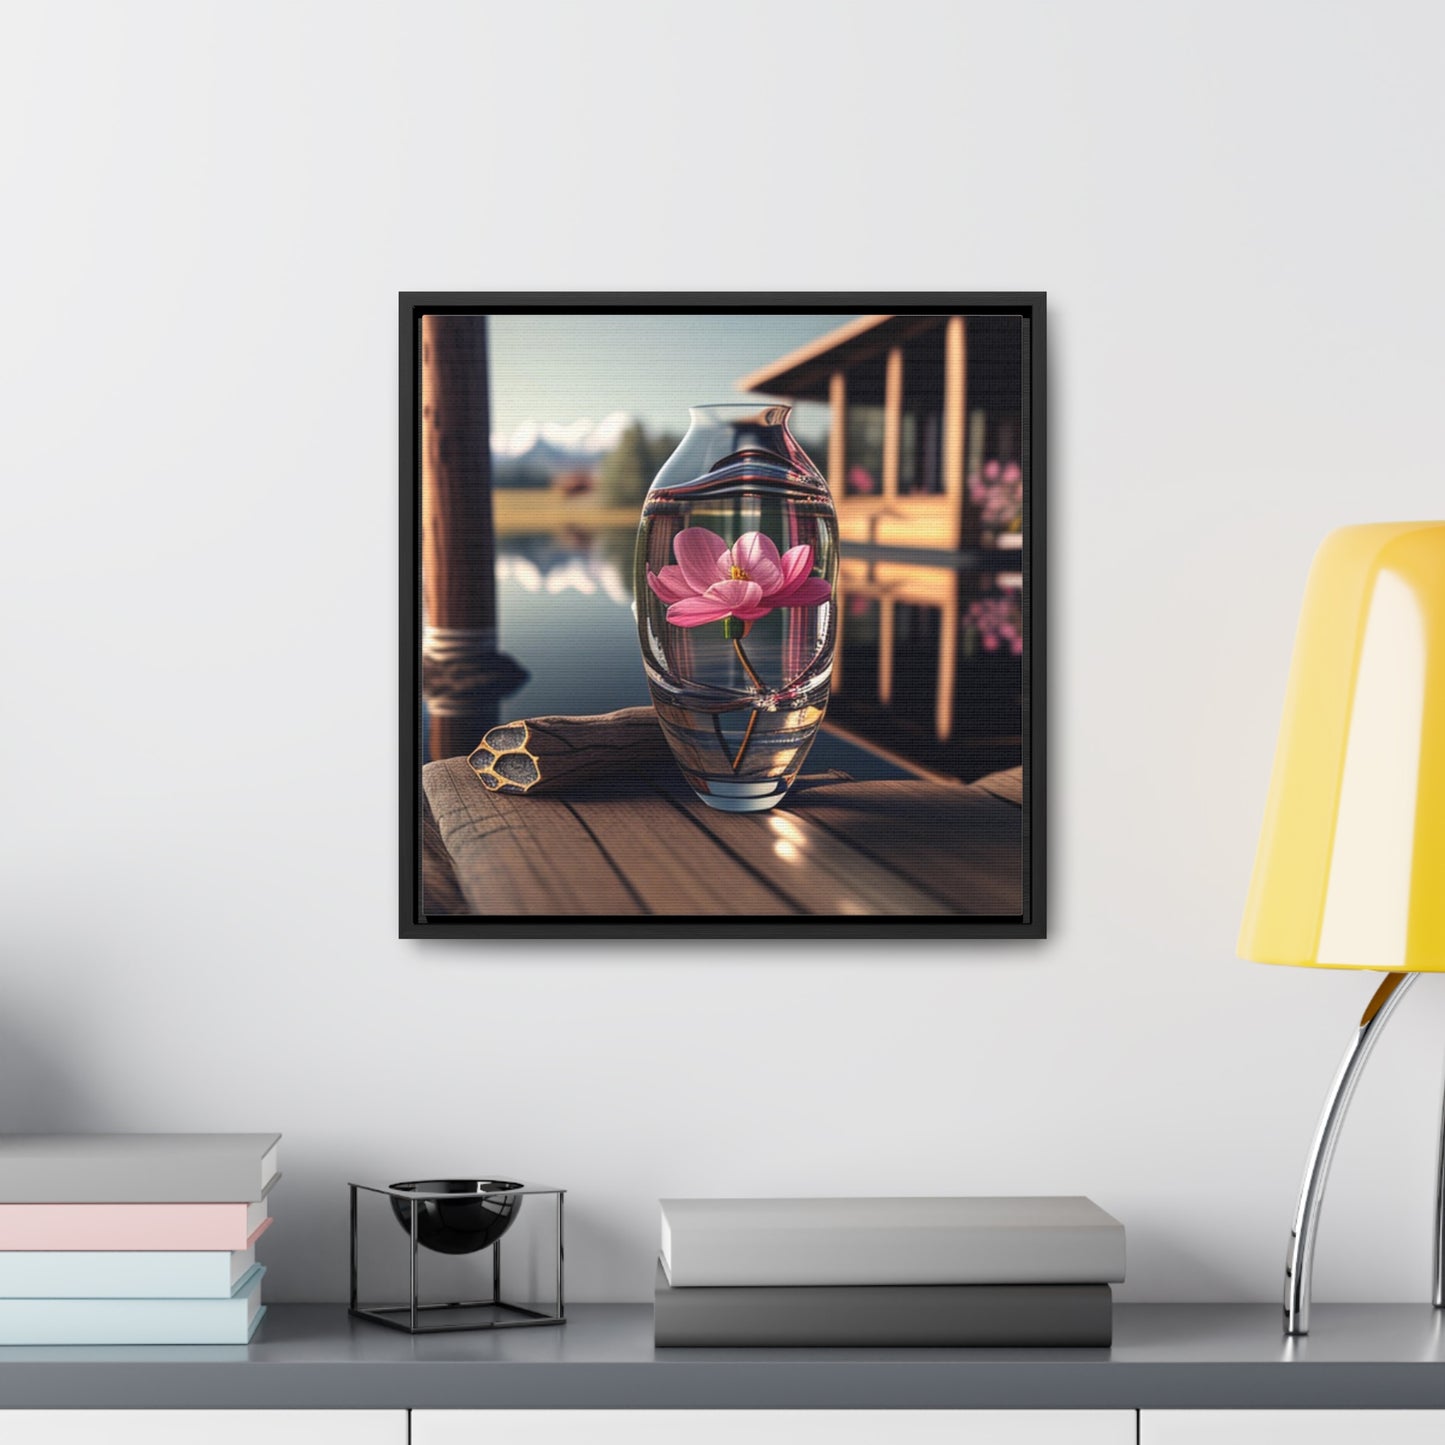 Gallery Canvas Wraps, Square Frame Pink Magnolia 2